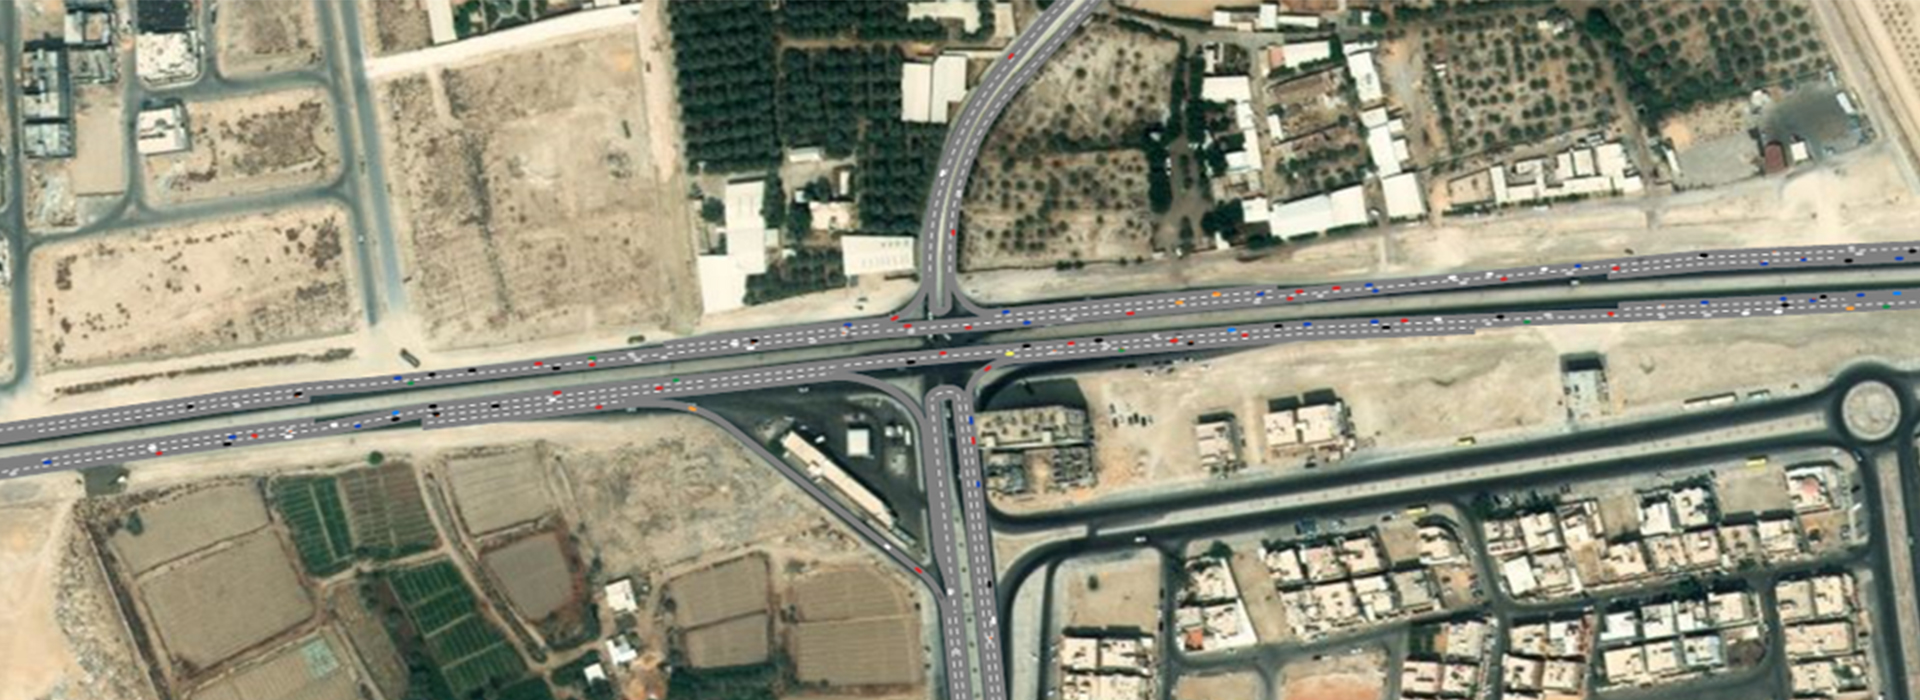 DESIGN AND OPERATIONAL PLAN FOR AL-UQAIR TOURIST ROAD IN AL AHSA - 5